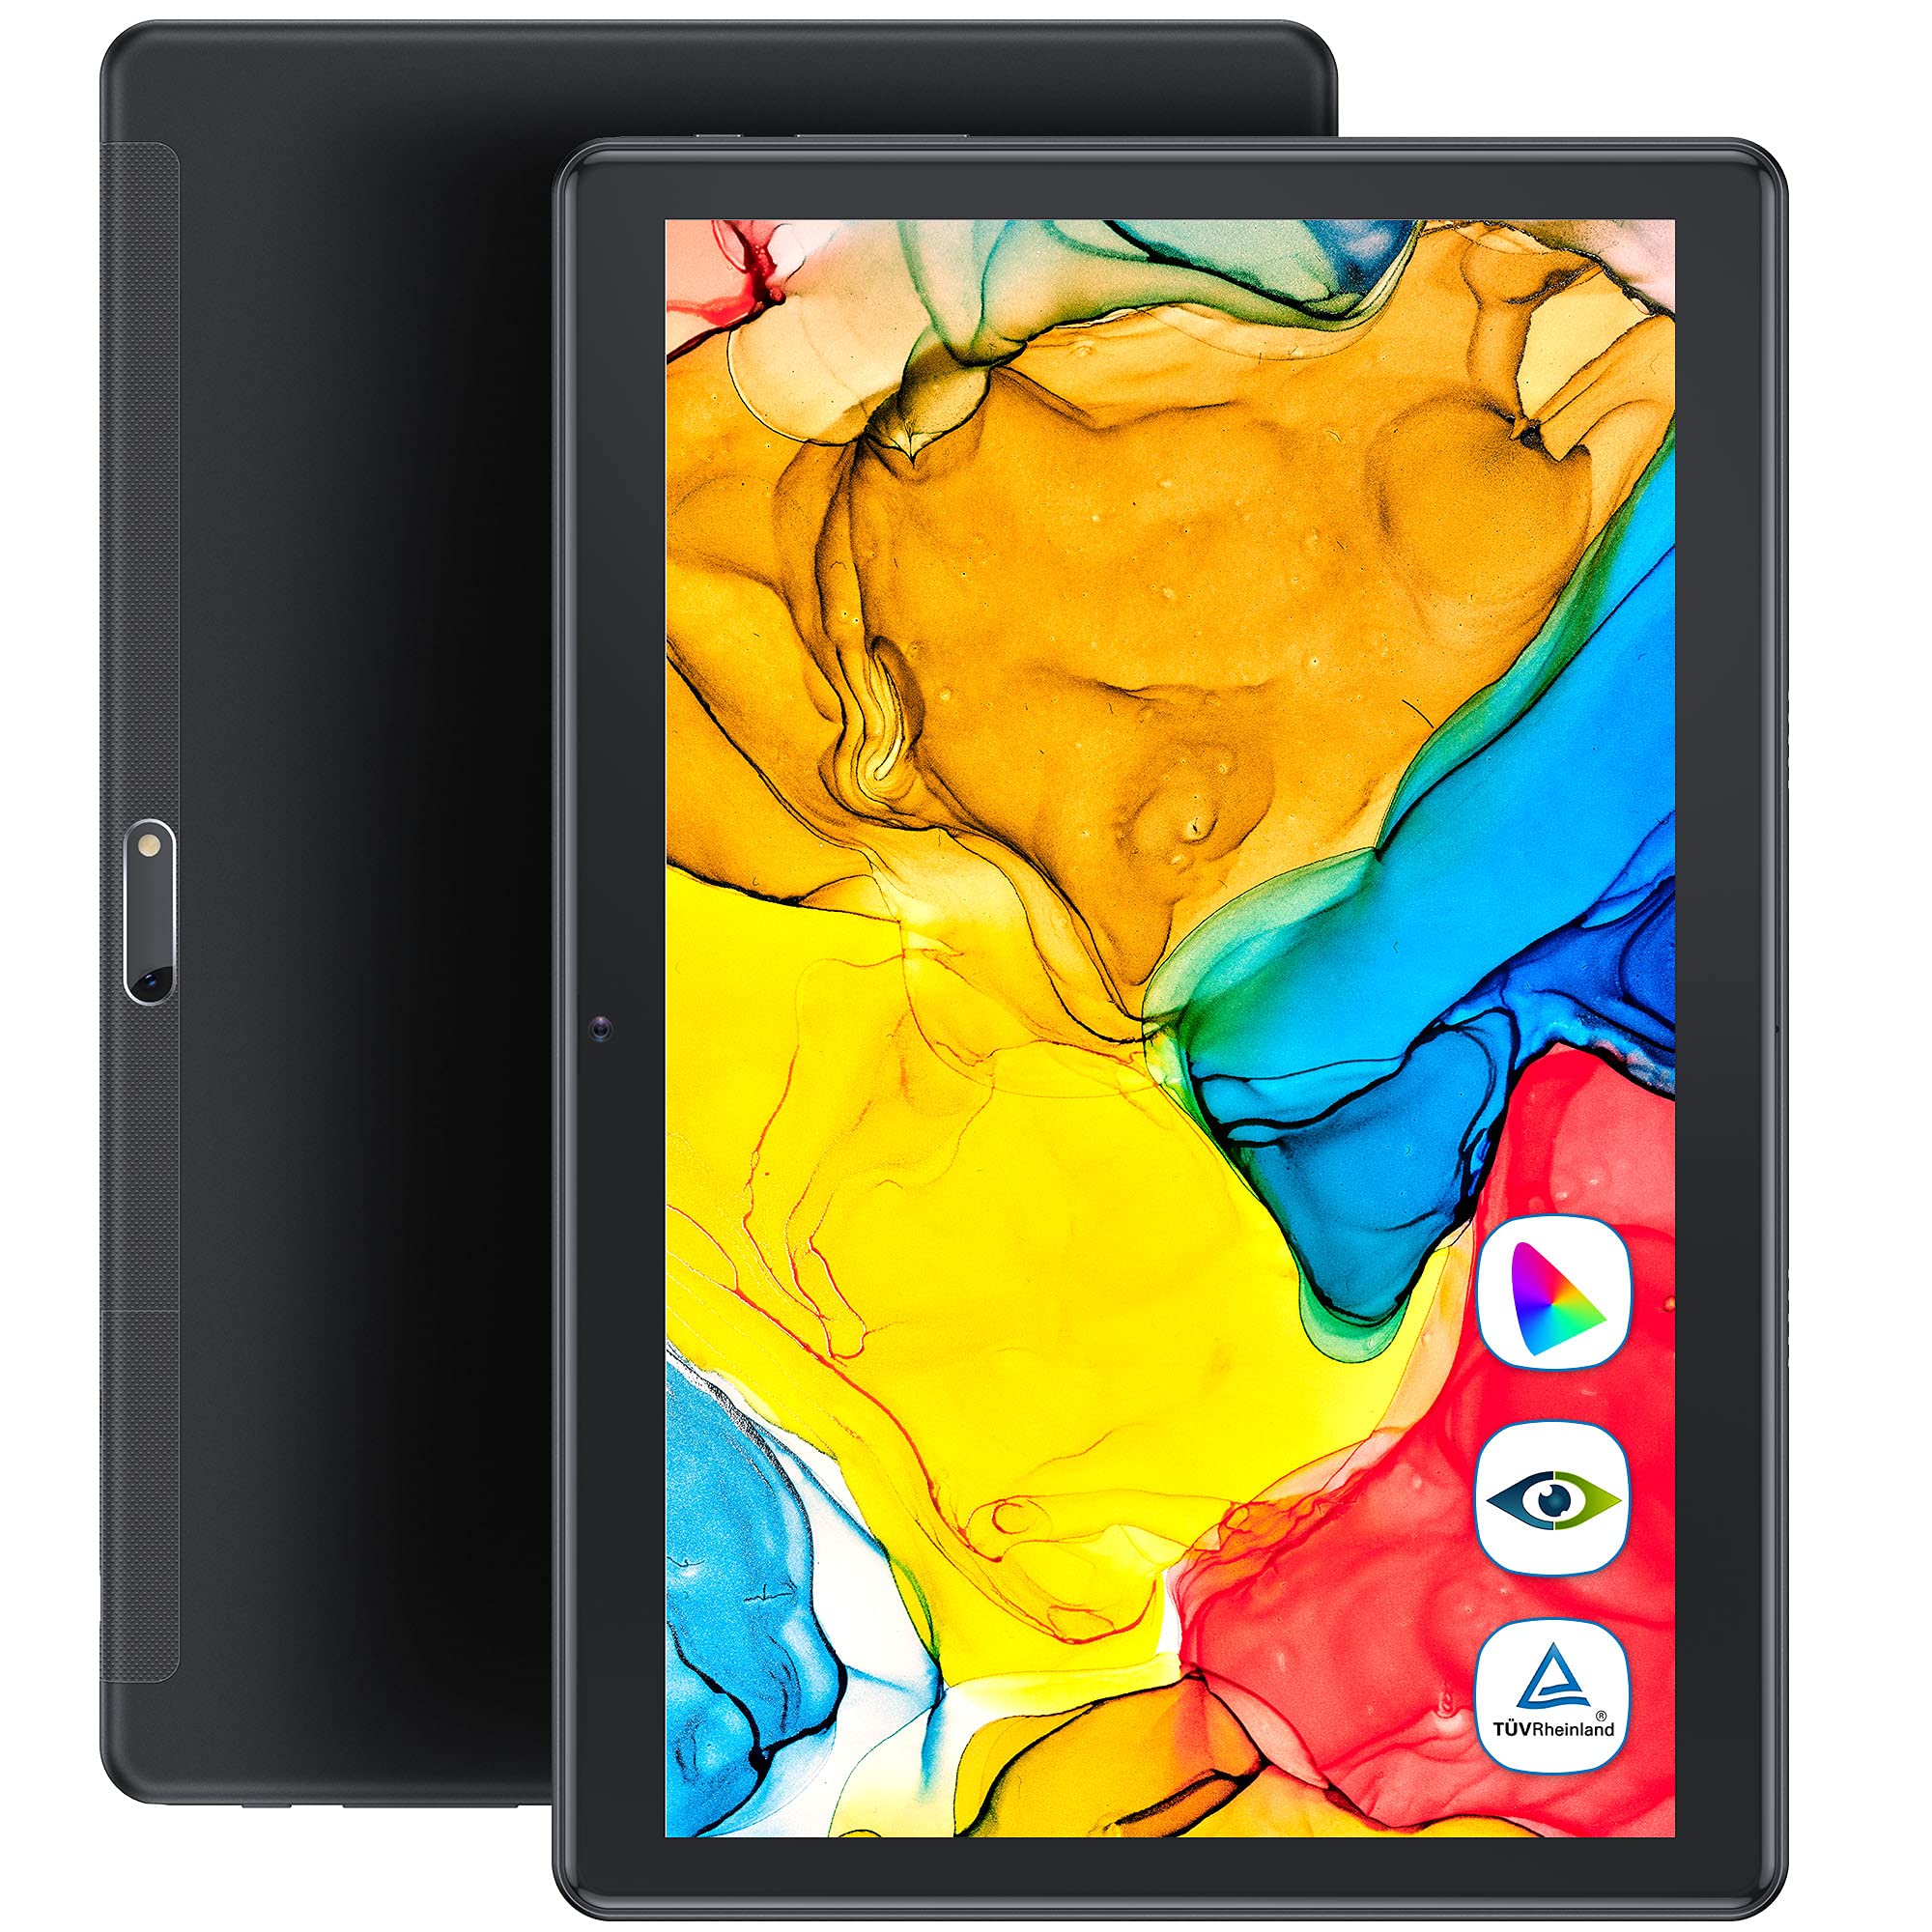 Dragon Touch Max10 Plus Android Tablet with Eye-Care Touchscreen - Quantum Dot Resolution, Octa-Core Processor, 3GB RAM 32GB Storage, Wide Color Gamut Display, Android 10, 10 inch 1080P FHD Screen